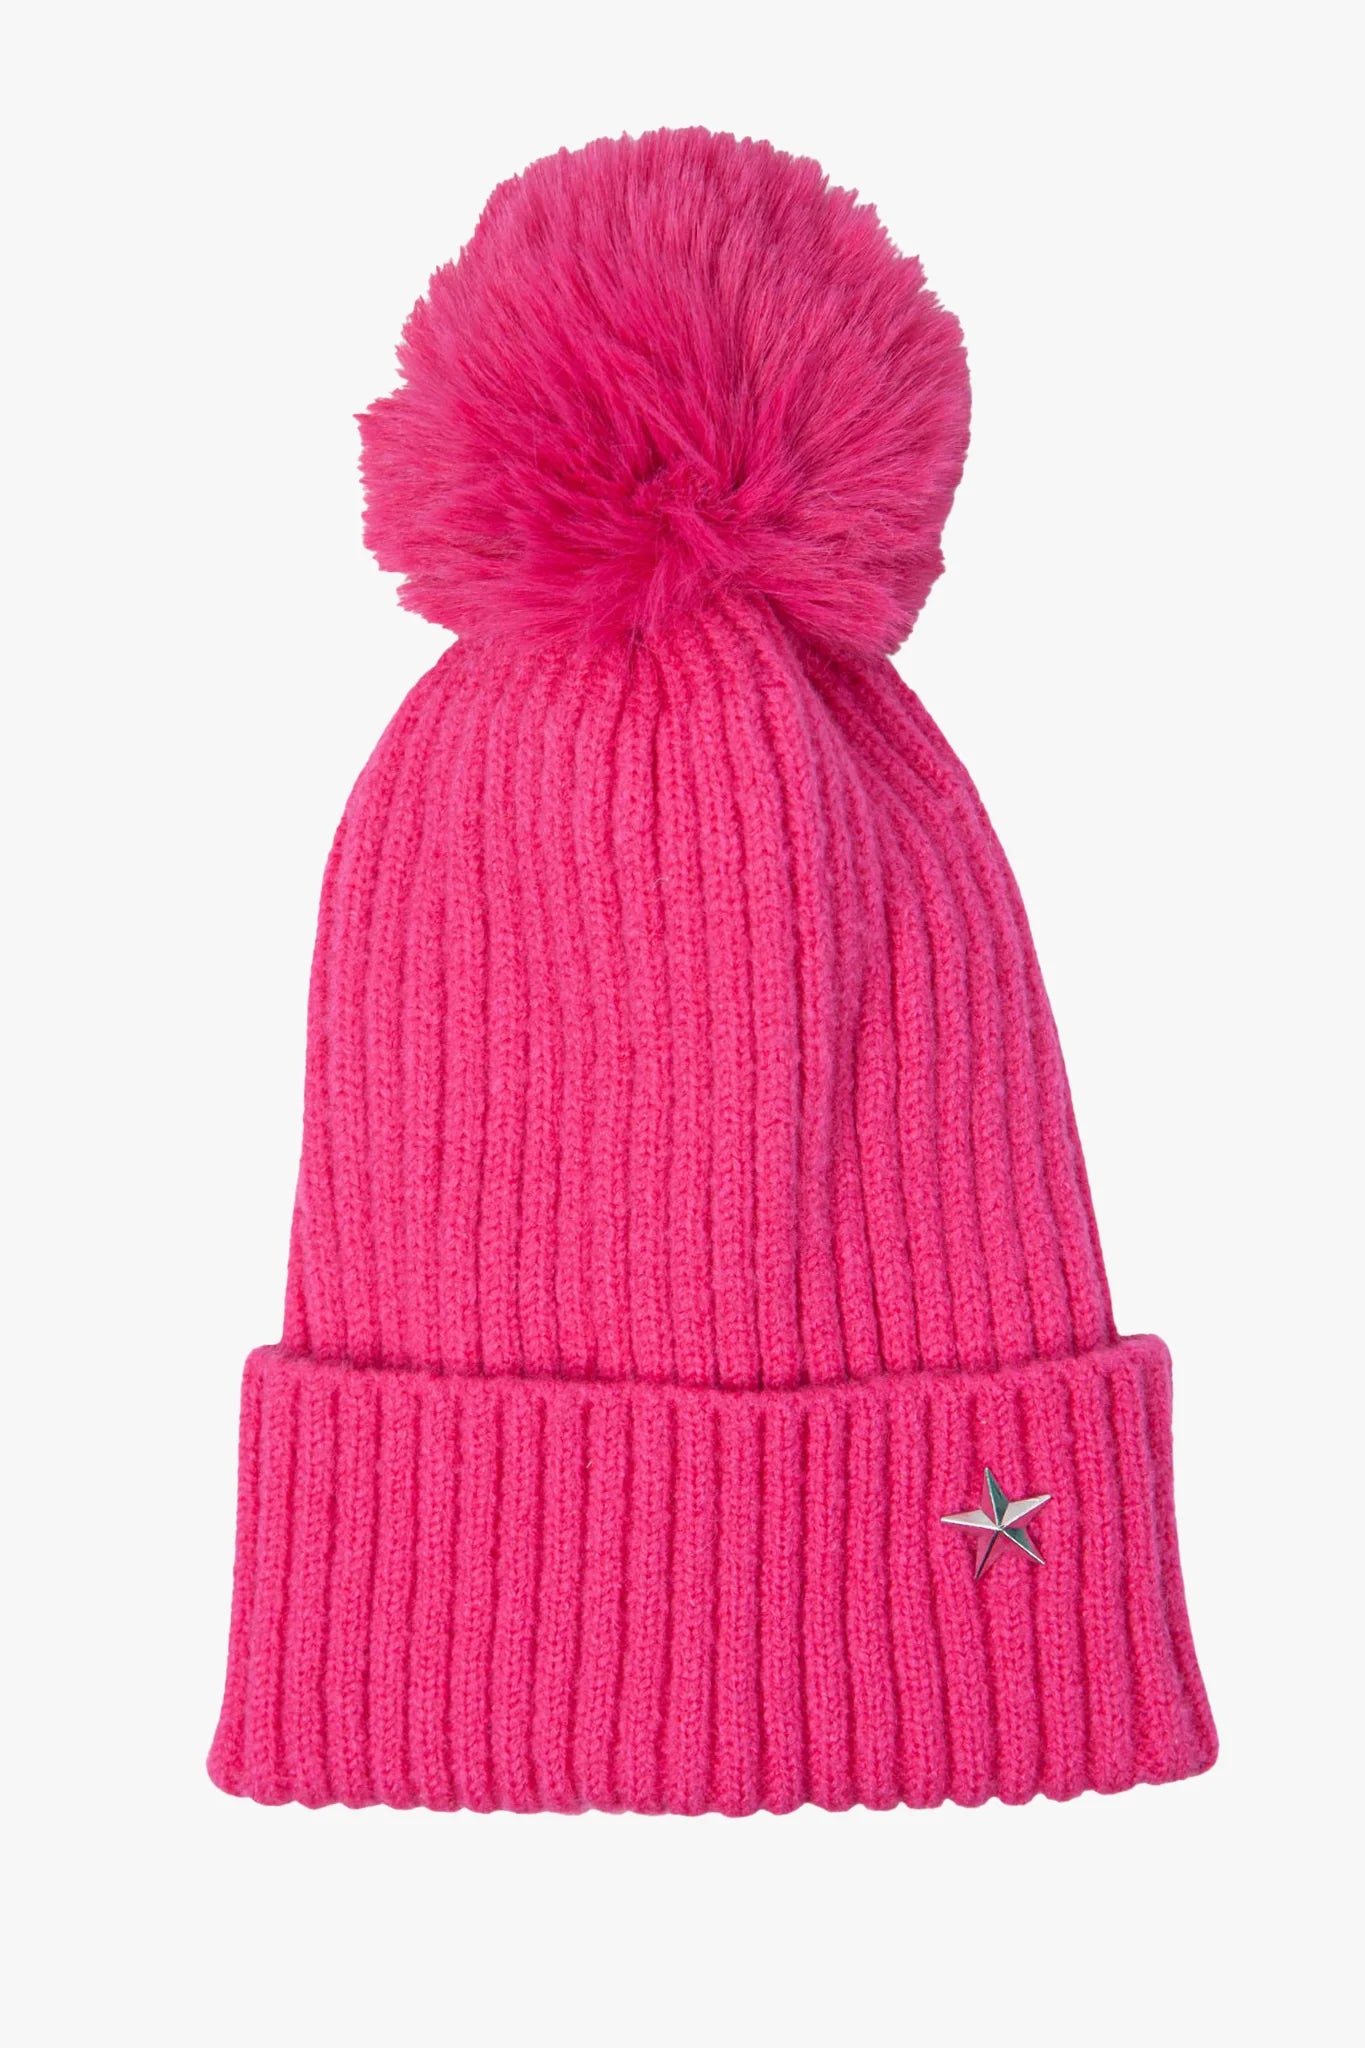 Bobble Hat - Fuchsia Pink with Metal Star